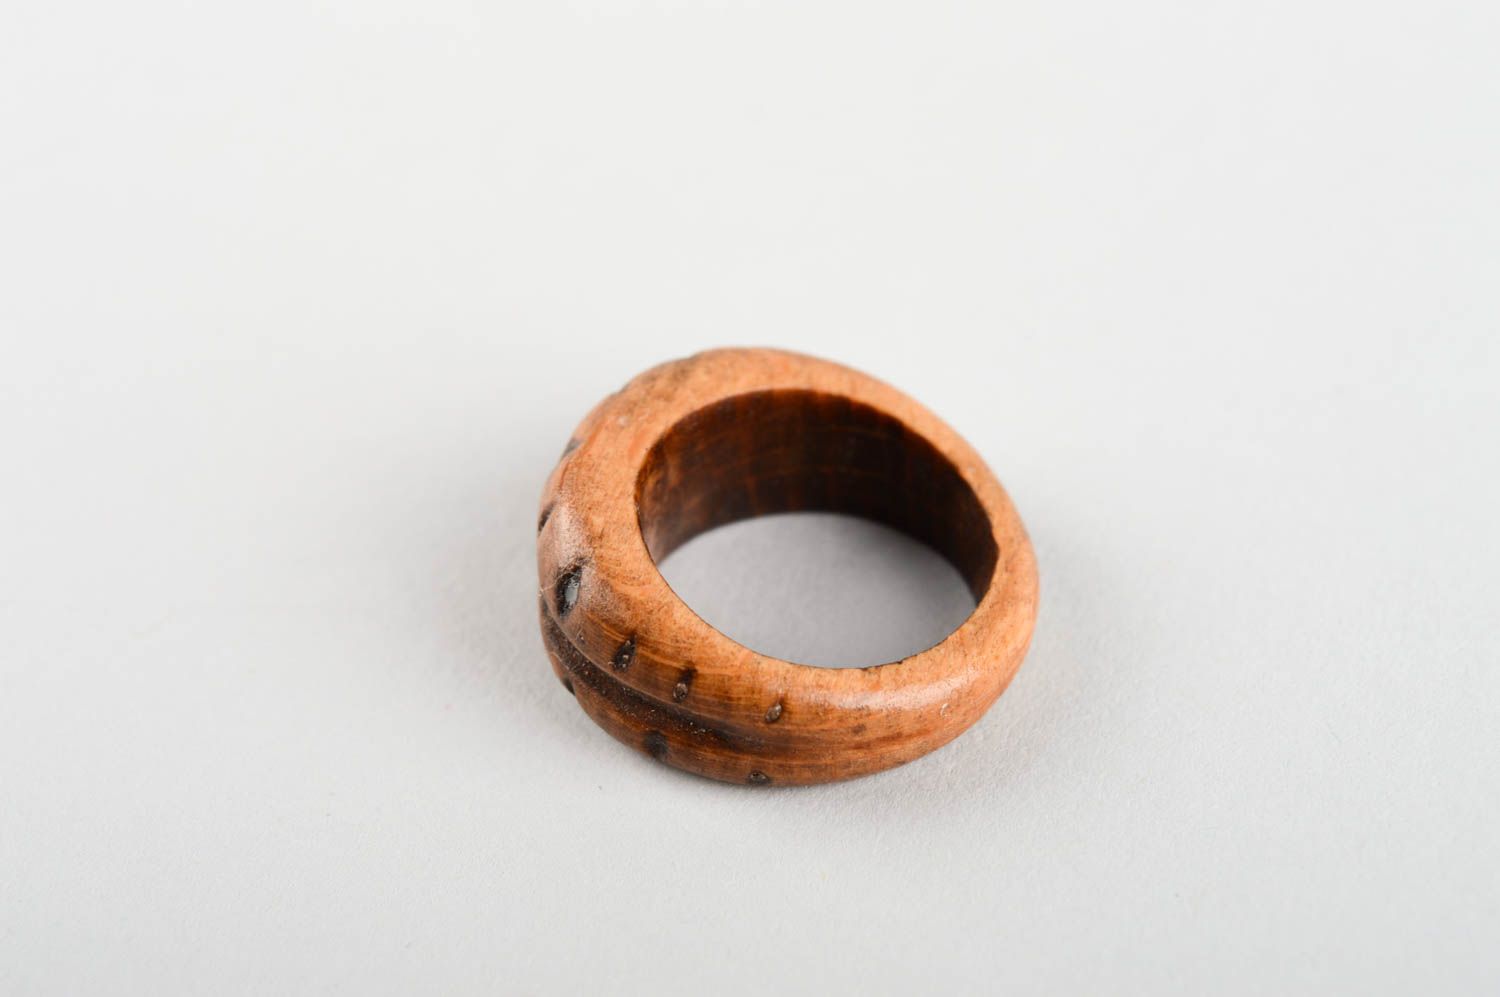 Stylish handmade wooden ring wooden jewelry designs accessories for girls photo 3